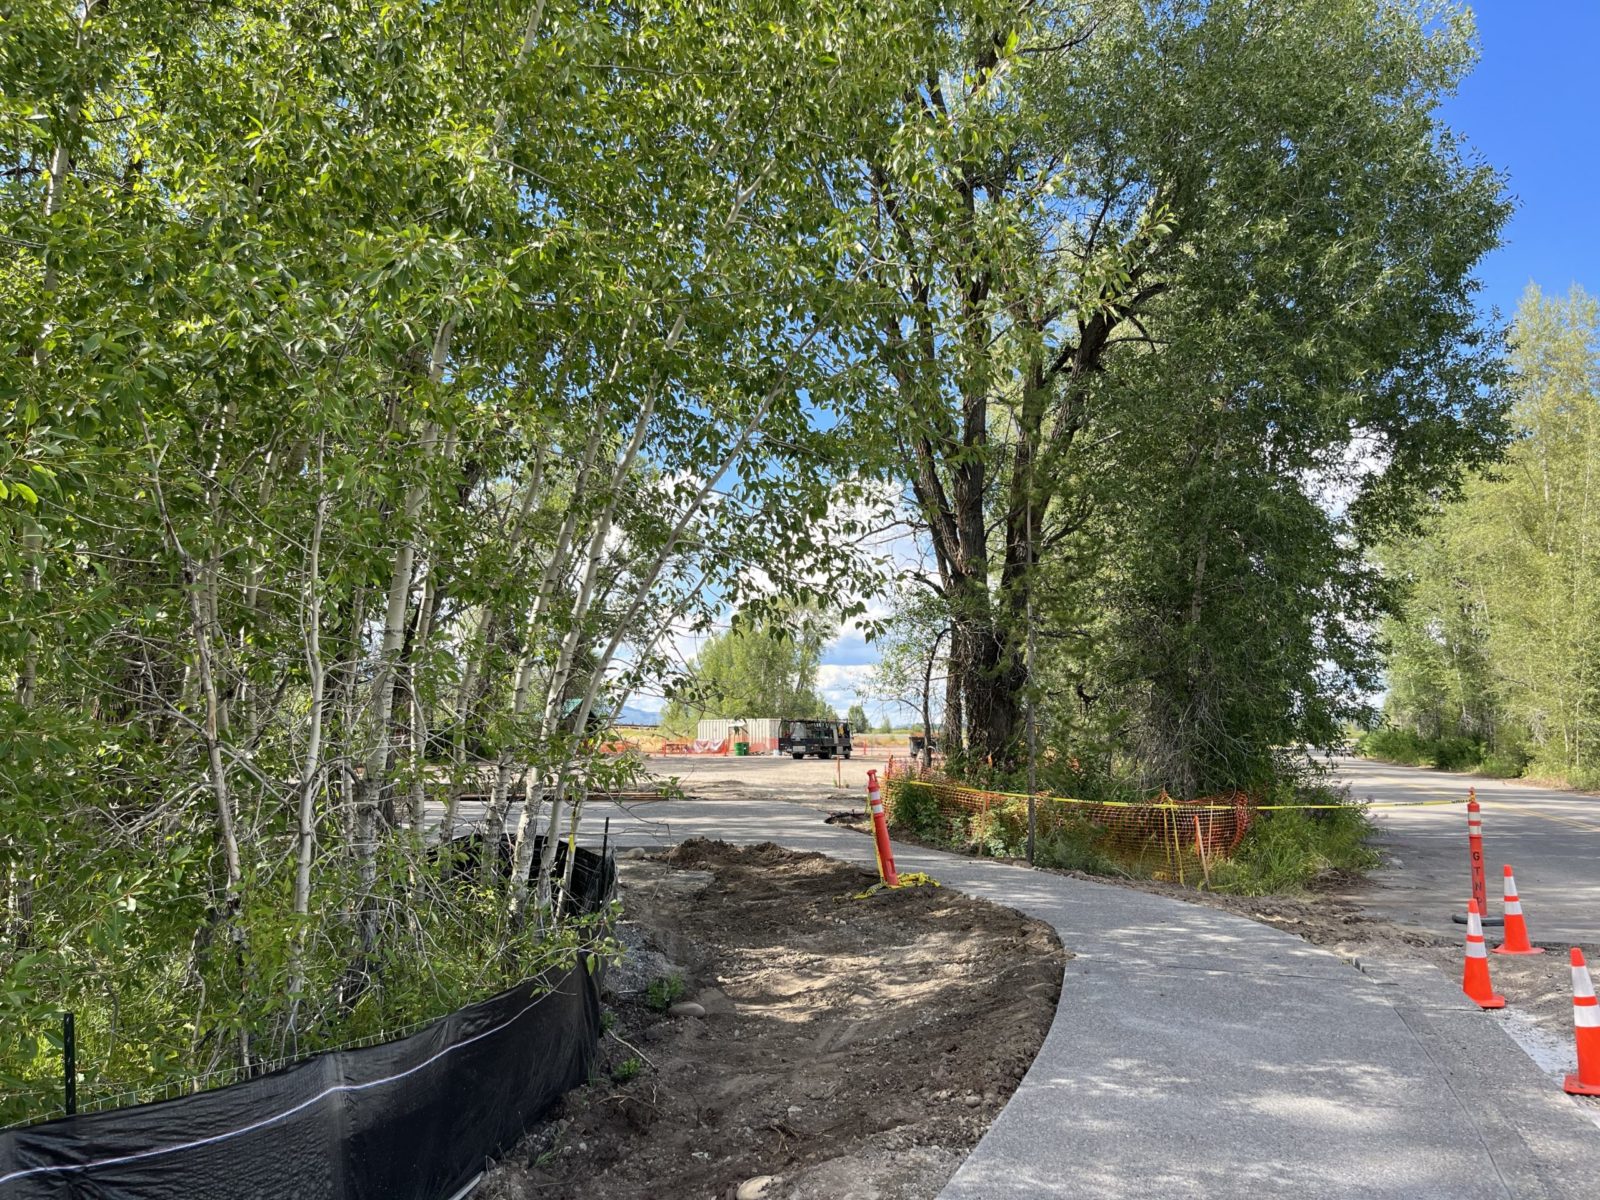 A new accessible pathway will lead visitors from the new parking lot and picnic area to the river.